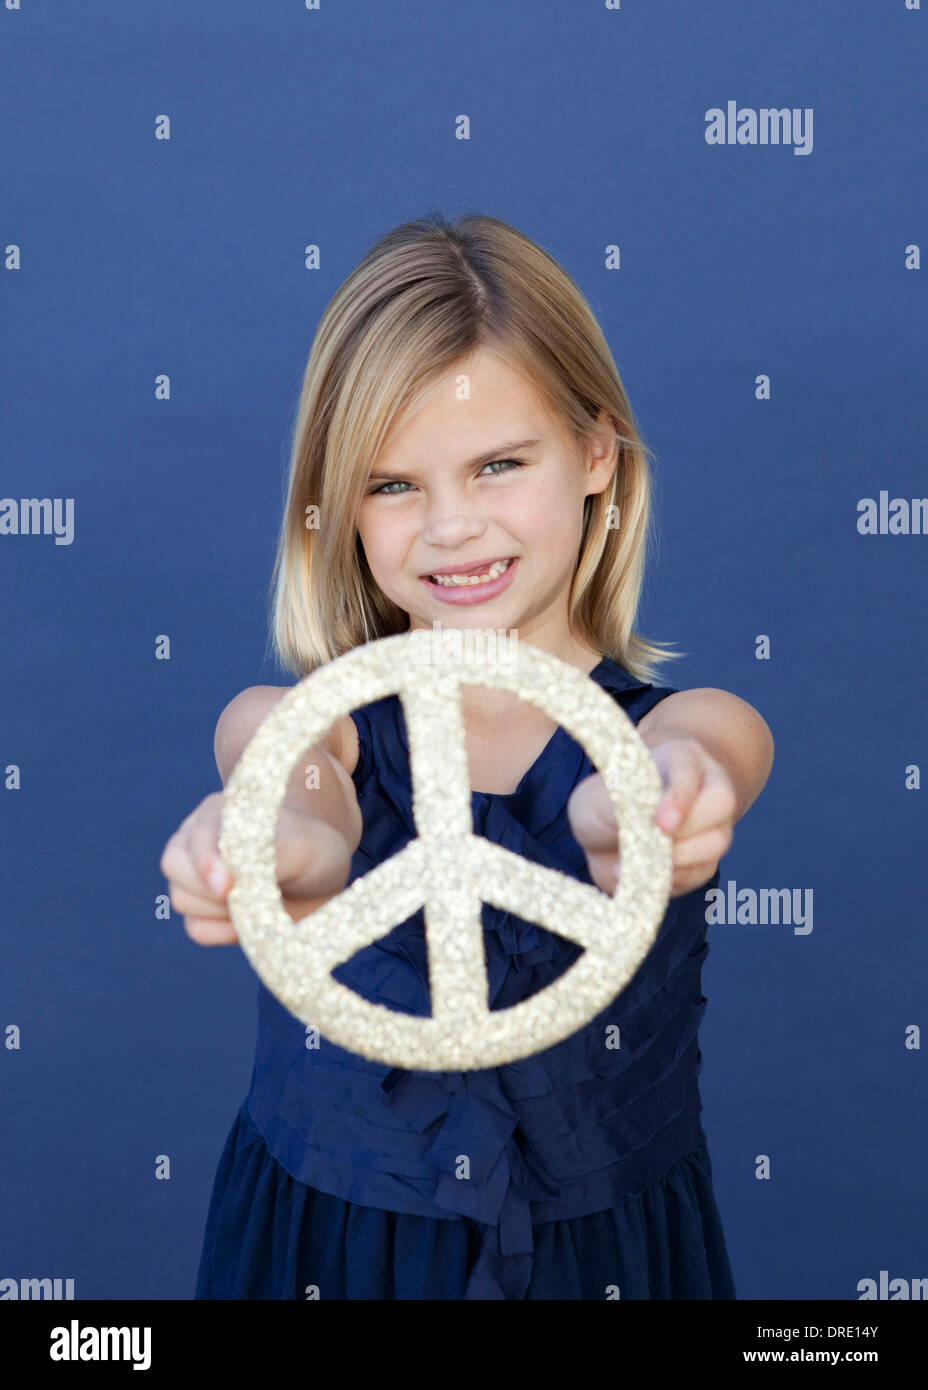 Portrait of young girl holding up peace sign Stock Photo